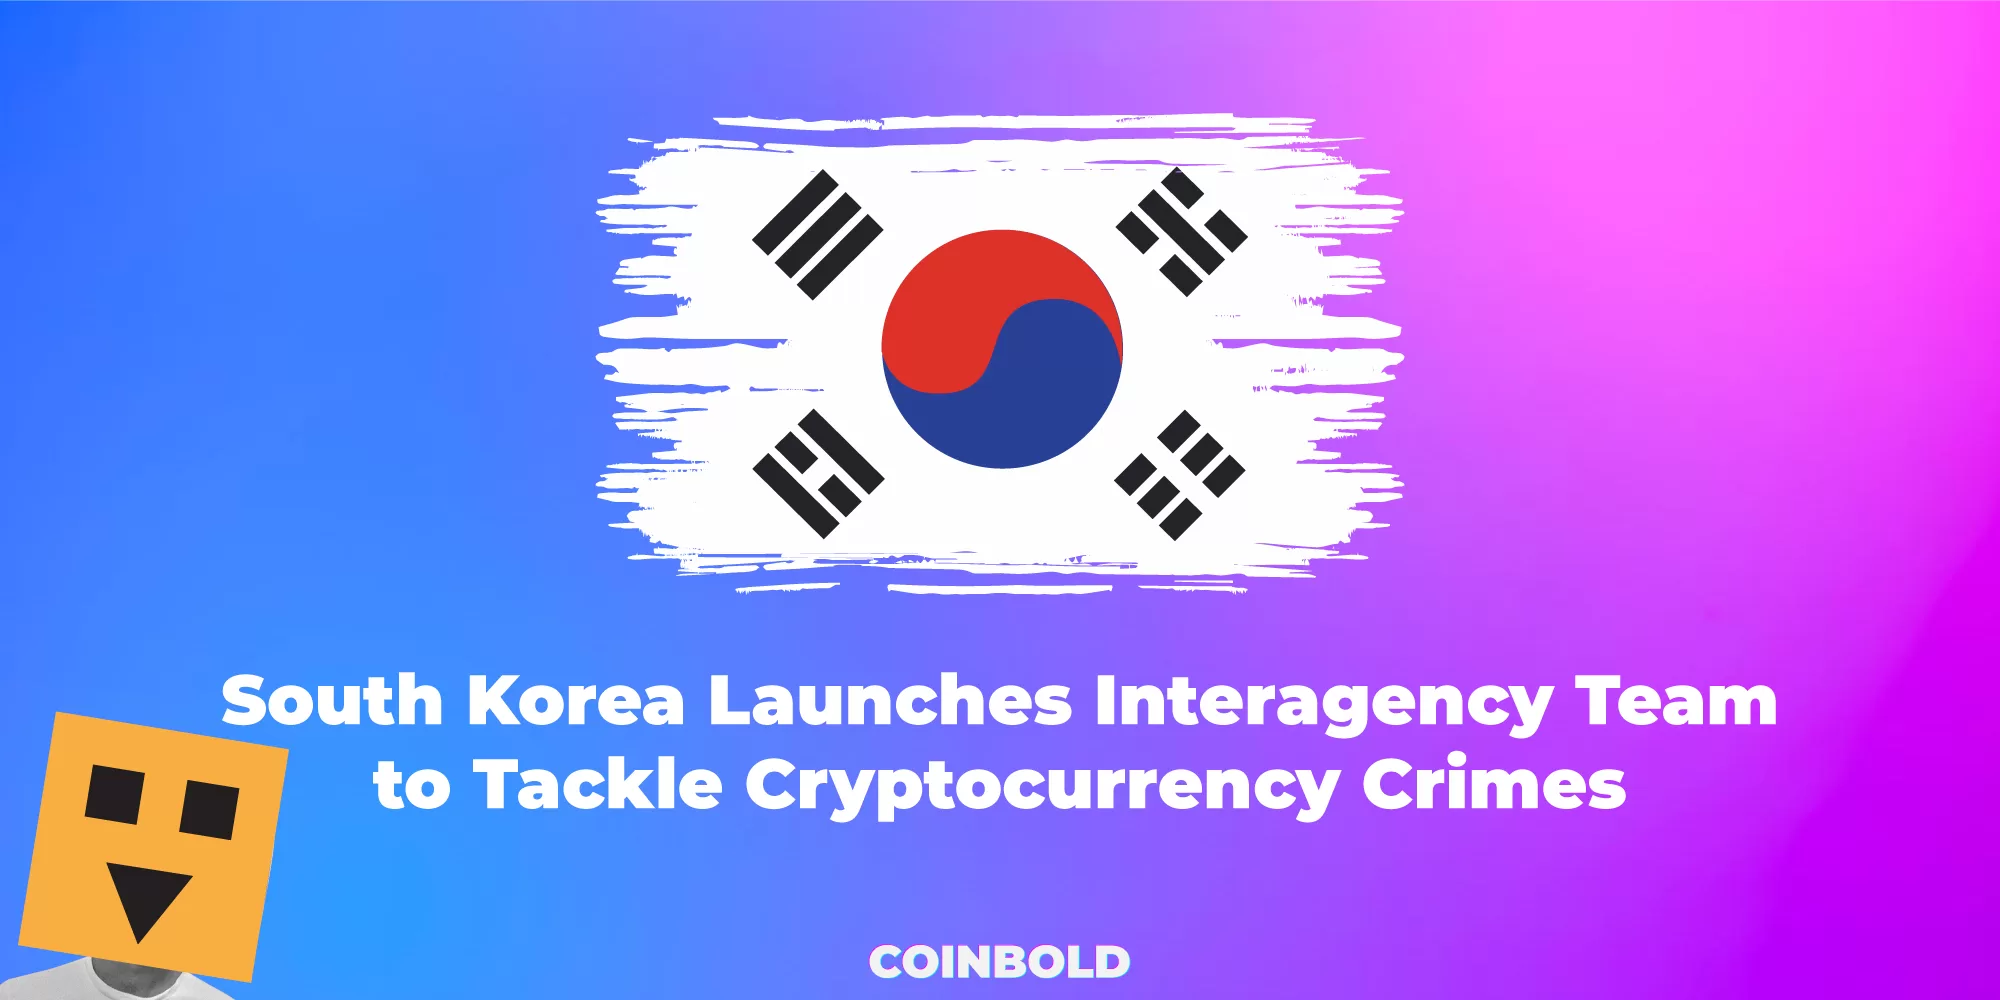 South Korea Launches Interagency Team to Tackle Cryptocurrency Crimes